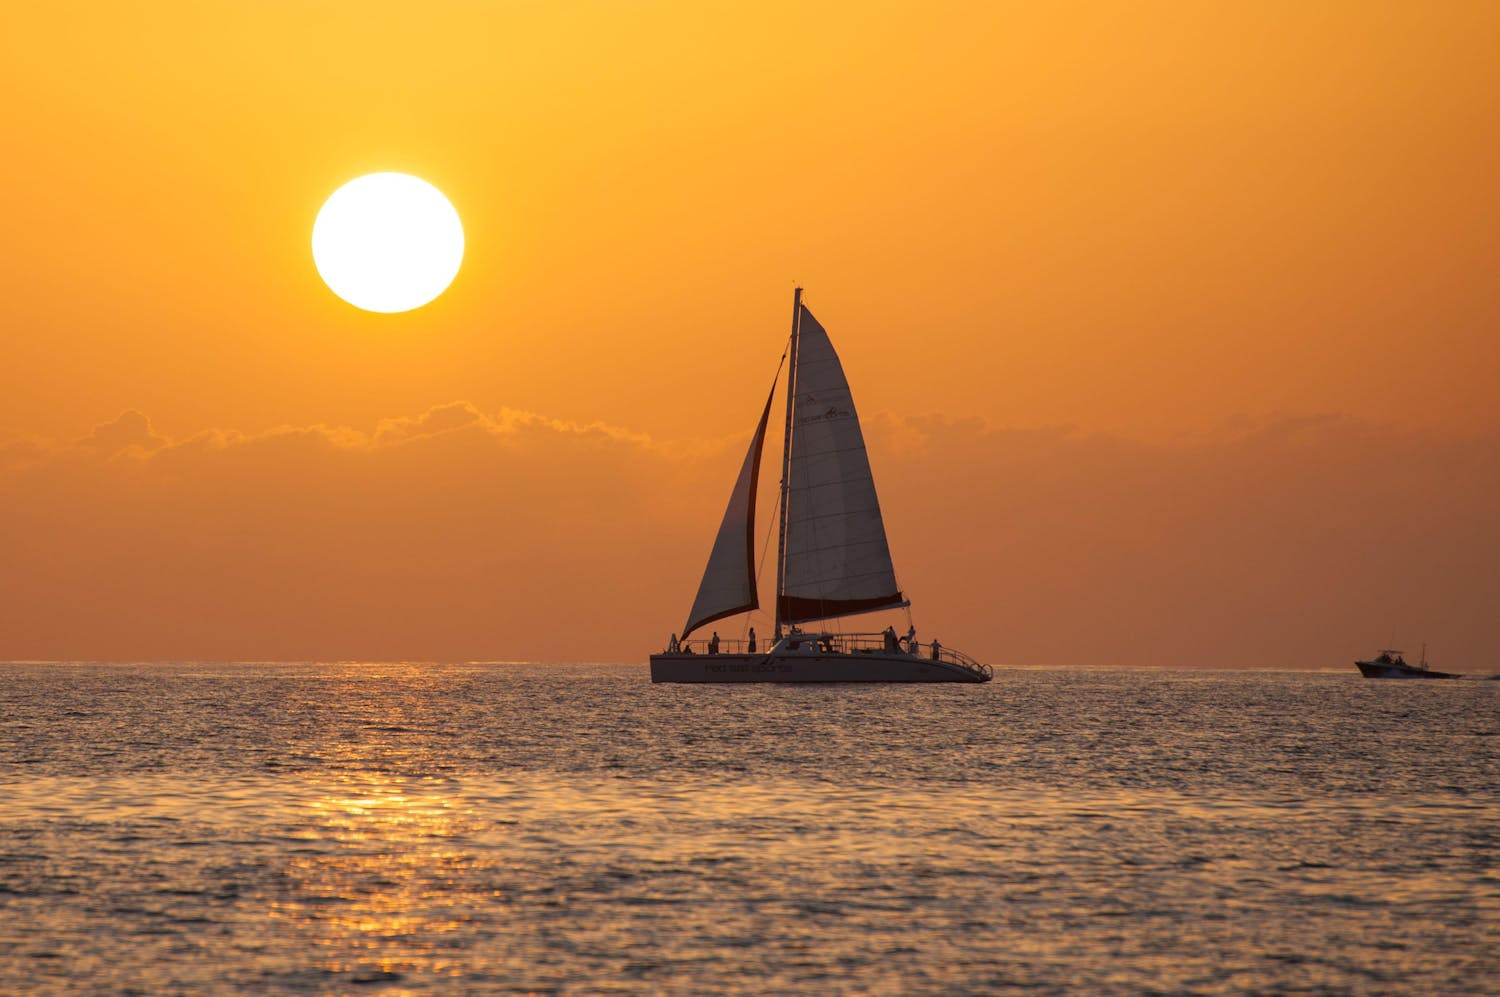 Sailing boat on out at sea during sunset